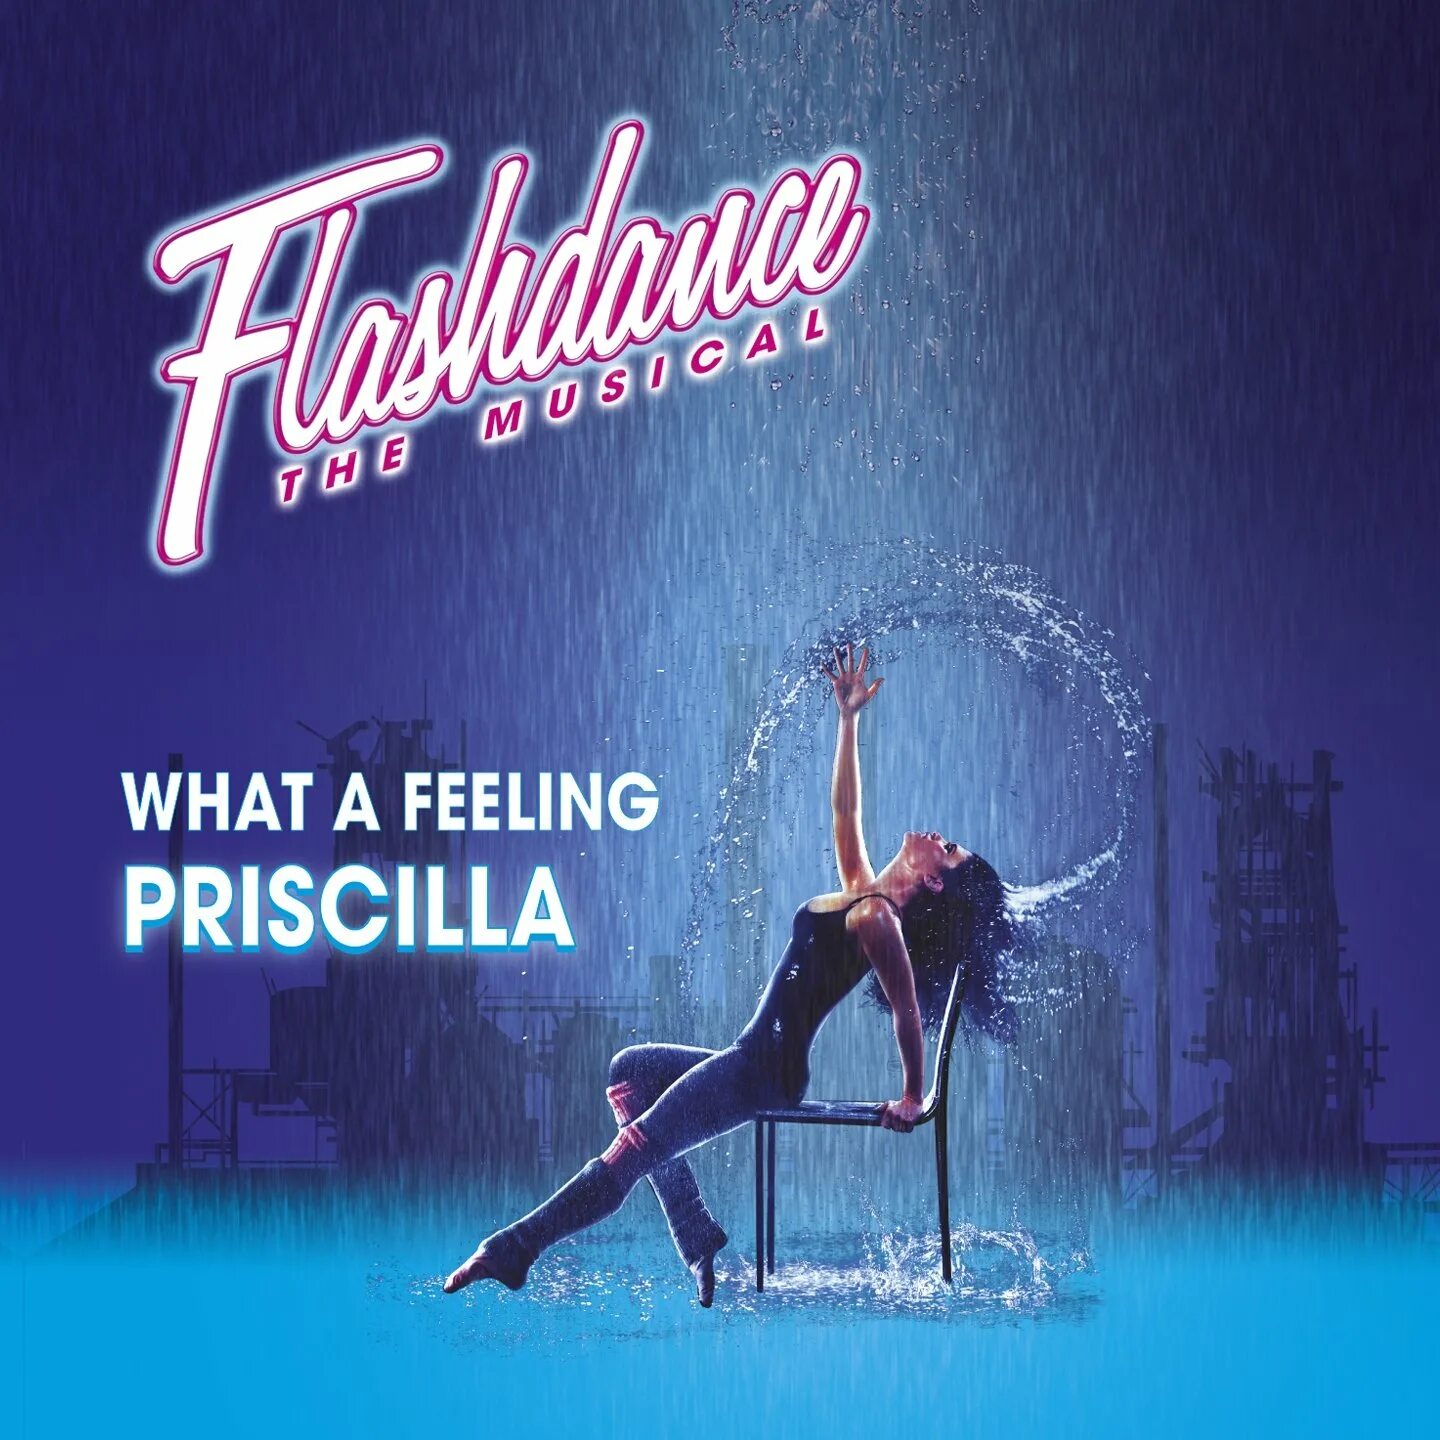 Flashdance what a feeling. What a feeling. Feeling. Fee. Klaas - Flashdance what a feeling (feat. Emmie, Lee Remix).